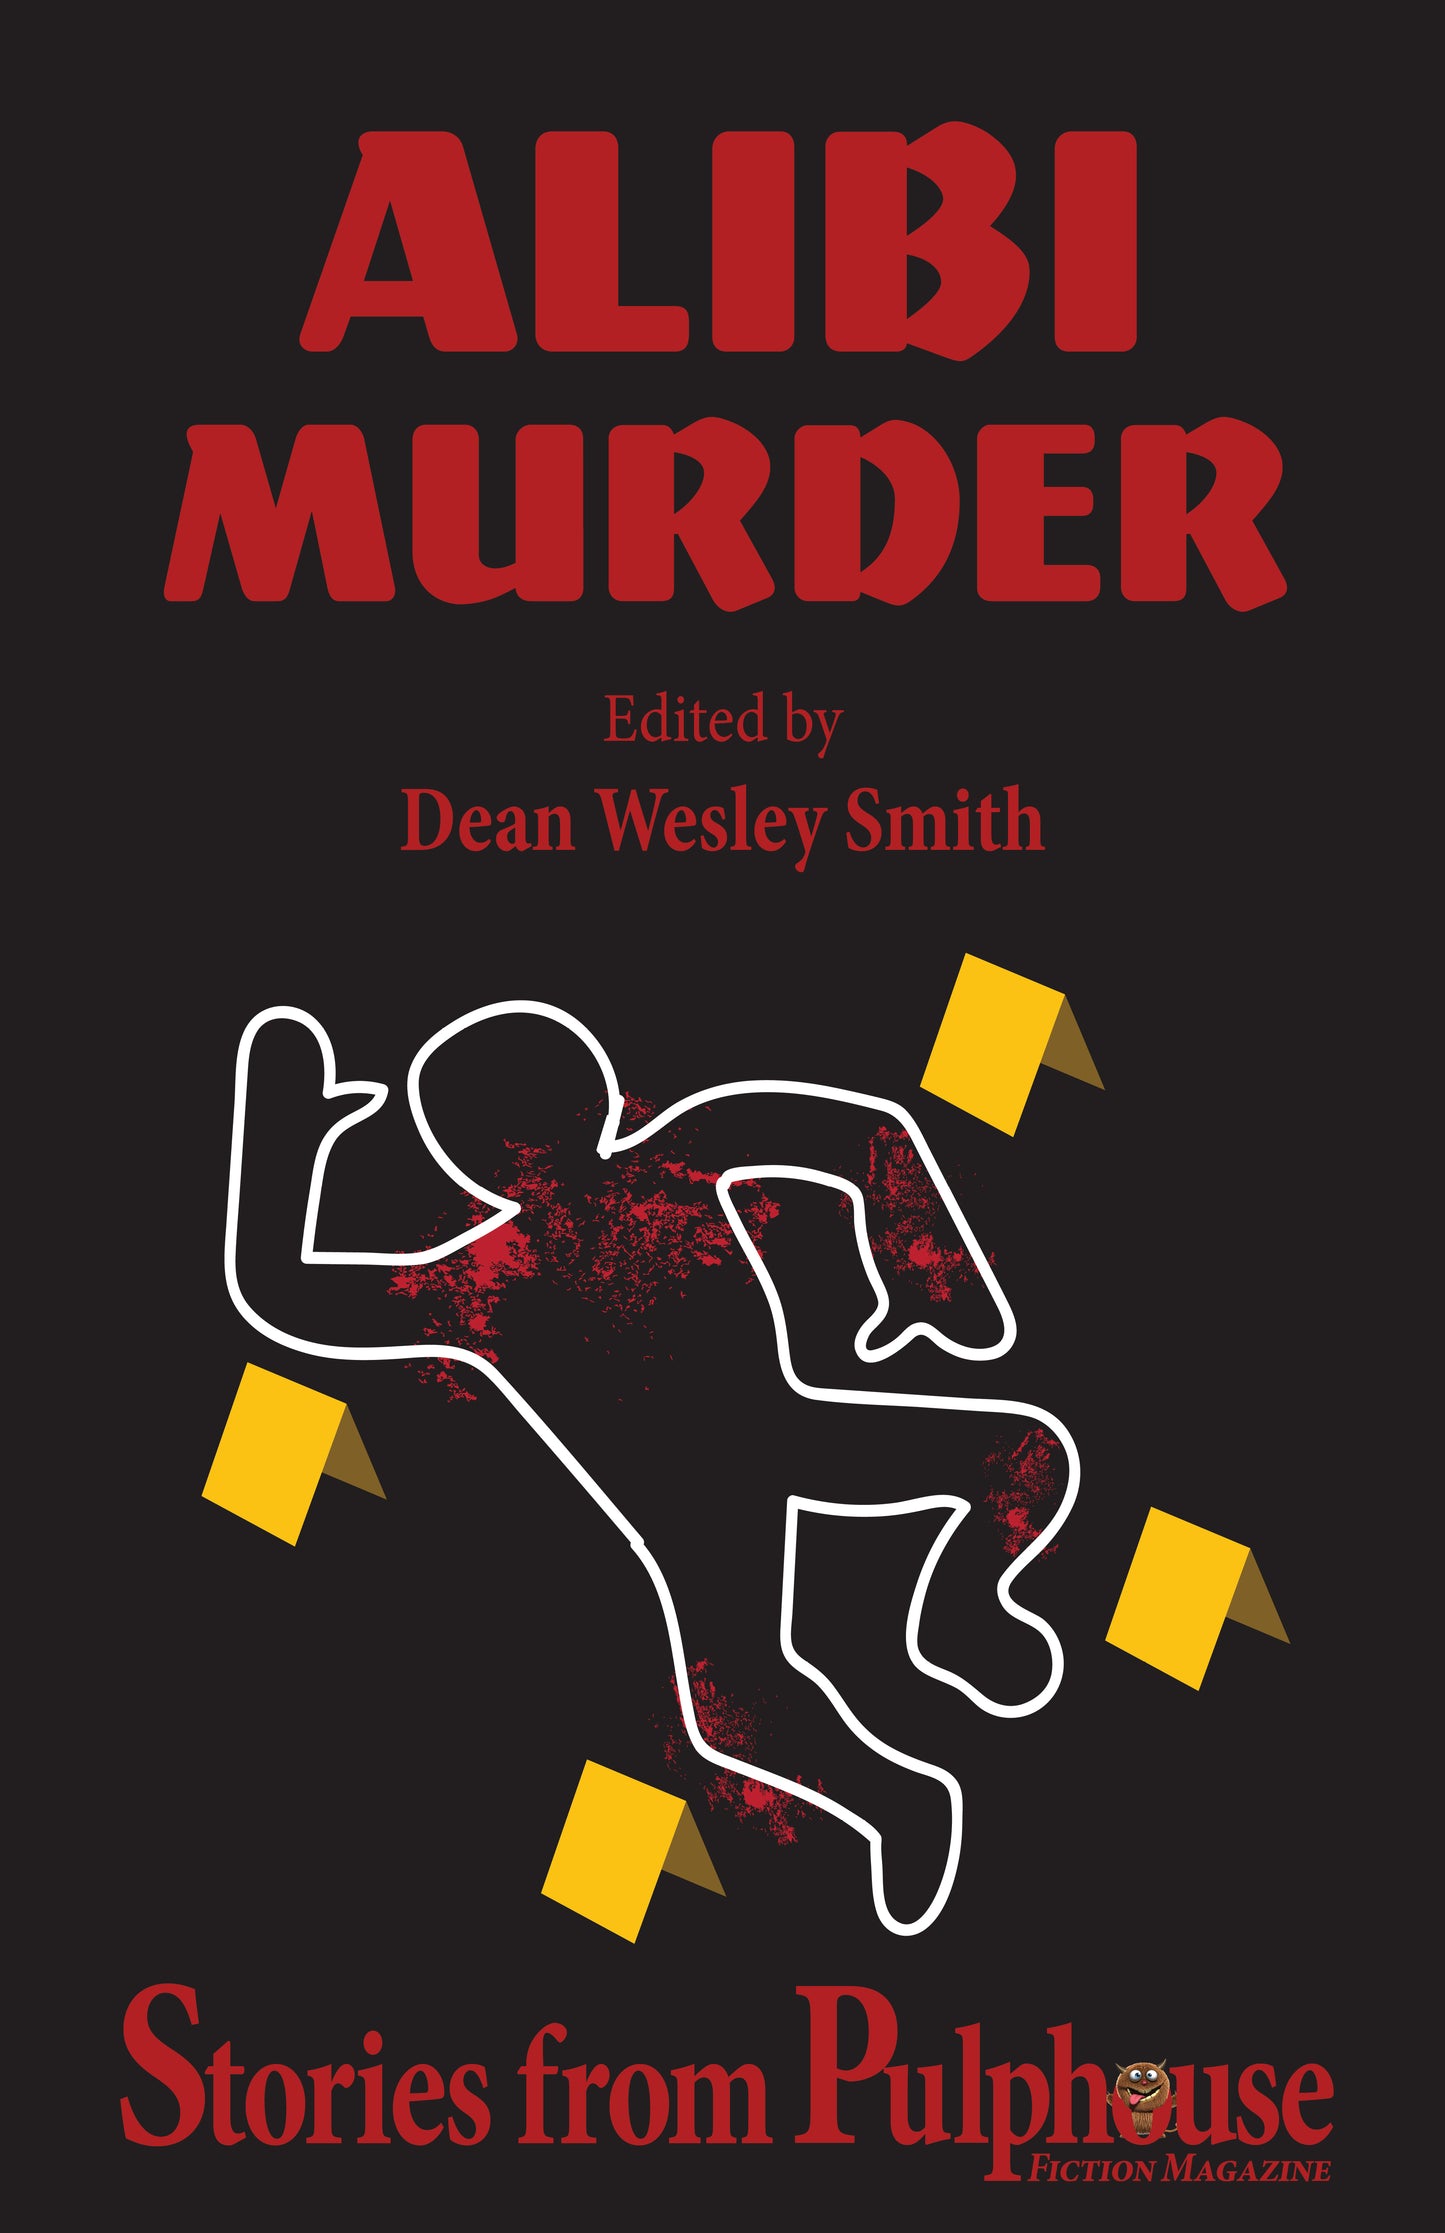 Alibi Murder: Stories from Pulphouse Fiction Magazine Edited by Dean Wesley Smith (EBOOK)